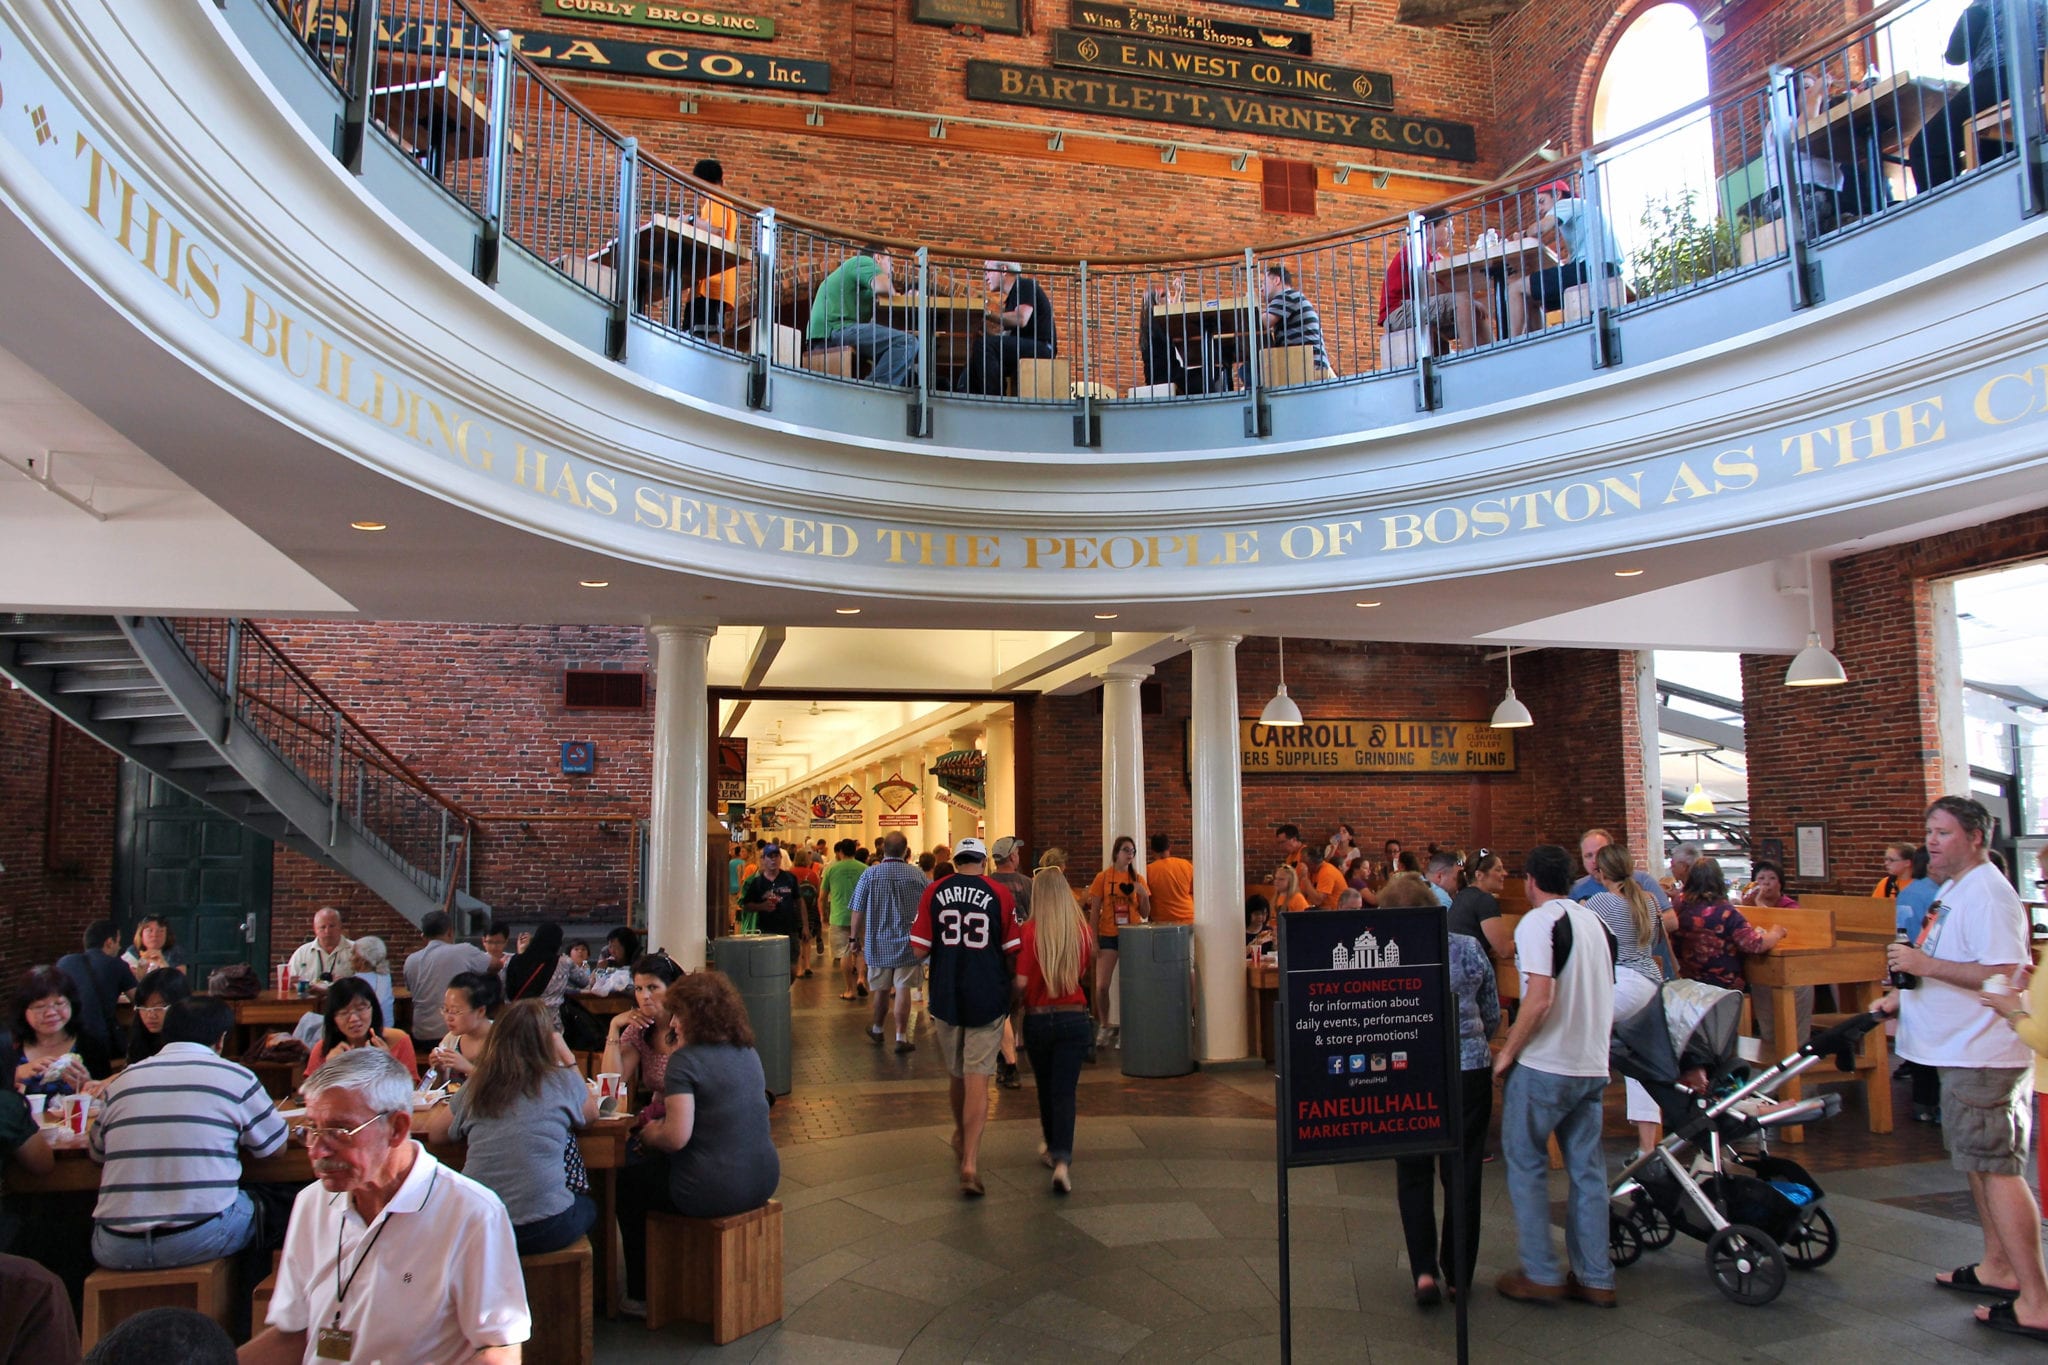 Faneuil Hall Marketplace operator disputes city’s claim